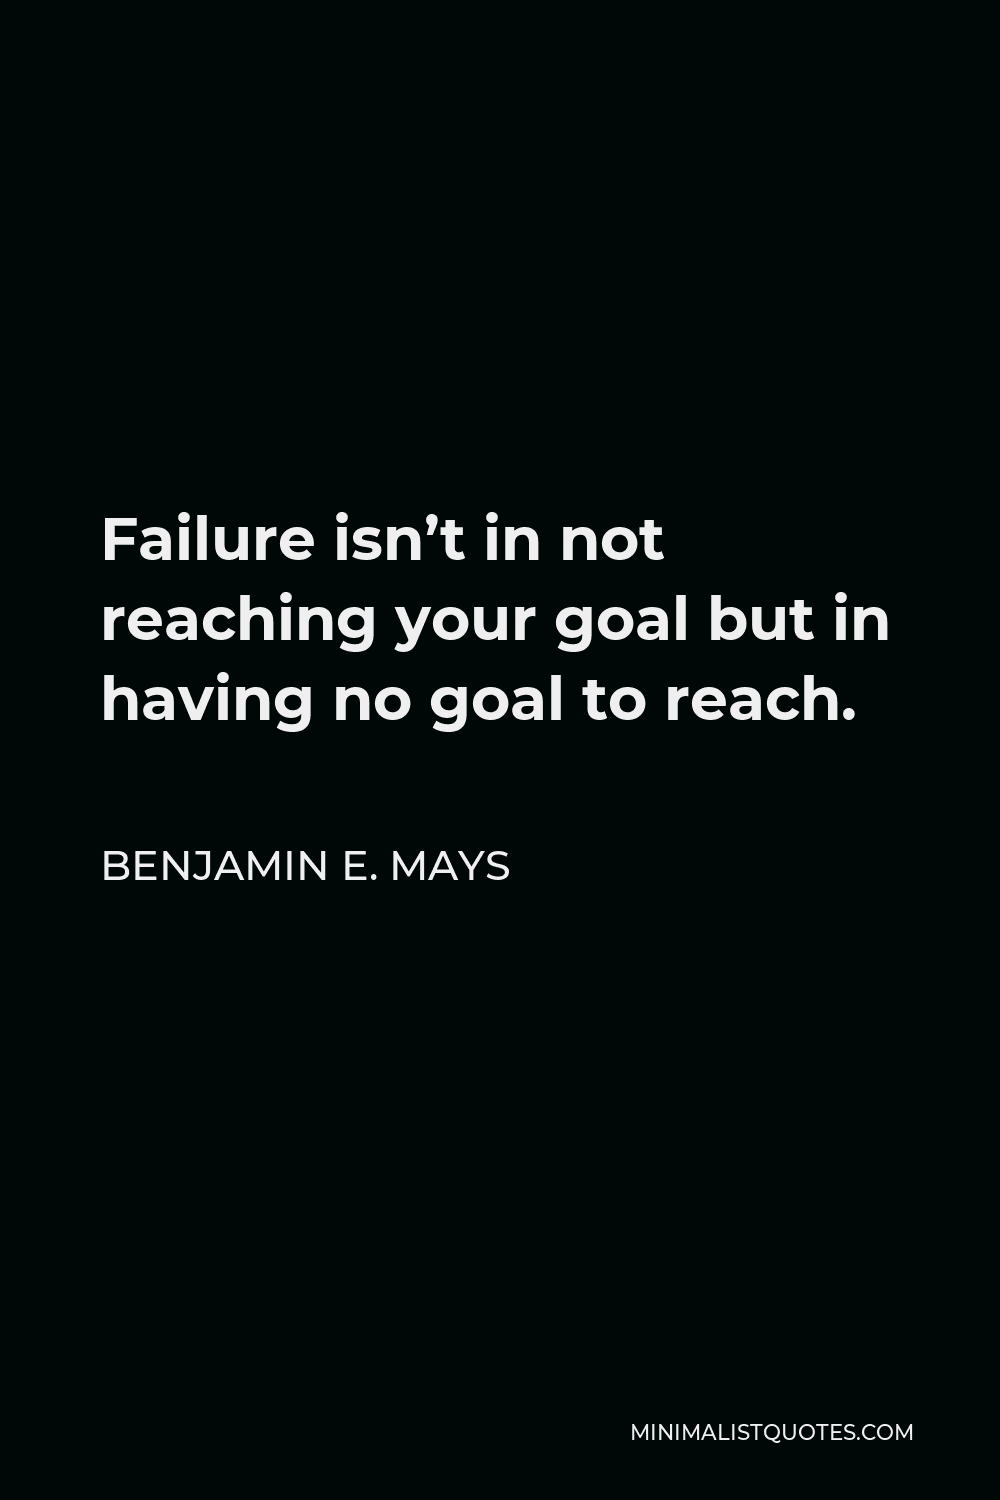 Benjamin E. Mays Quote - Failure isn’t in not reaching your goal but in having no goal to reach.